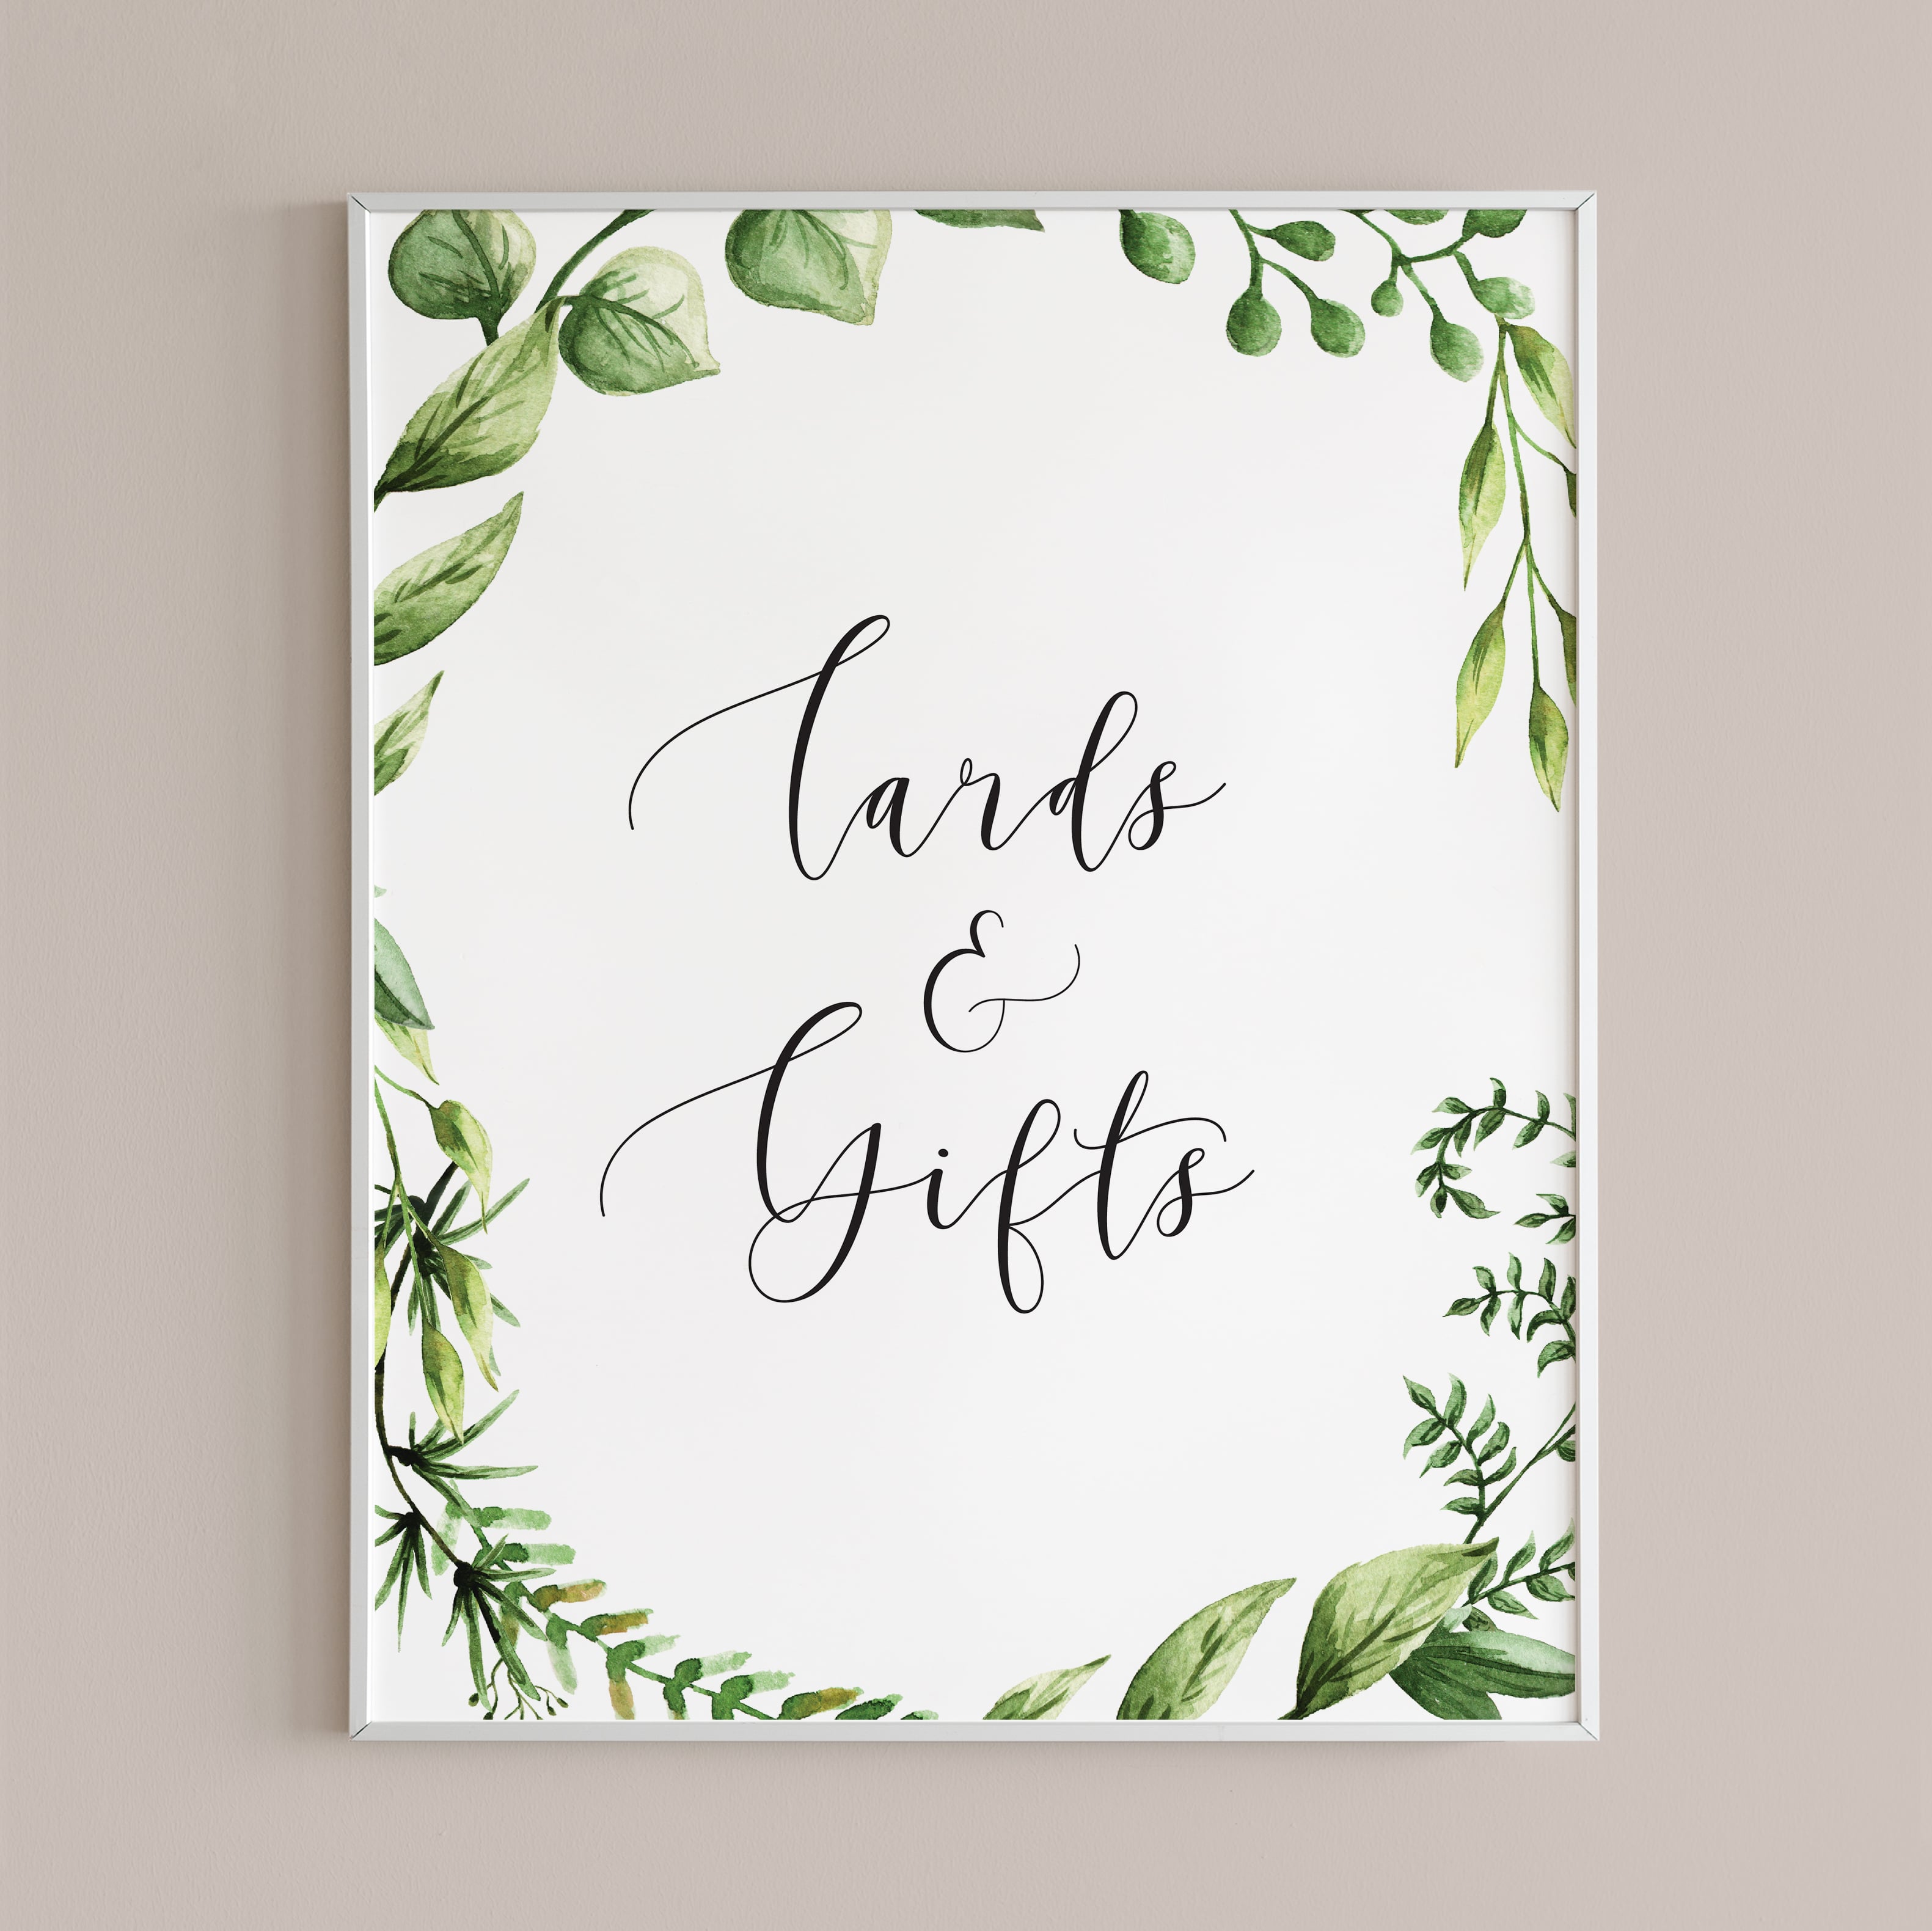 Green cards and gifts table sign printable digital files by LittleSizzle